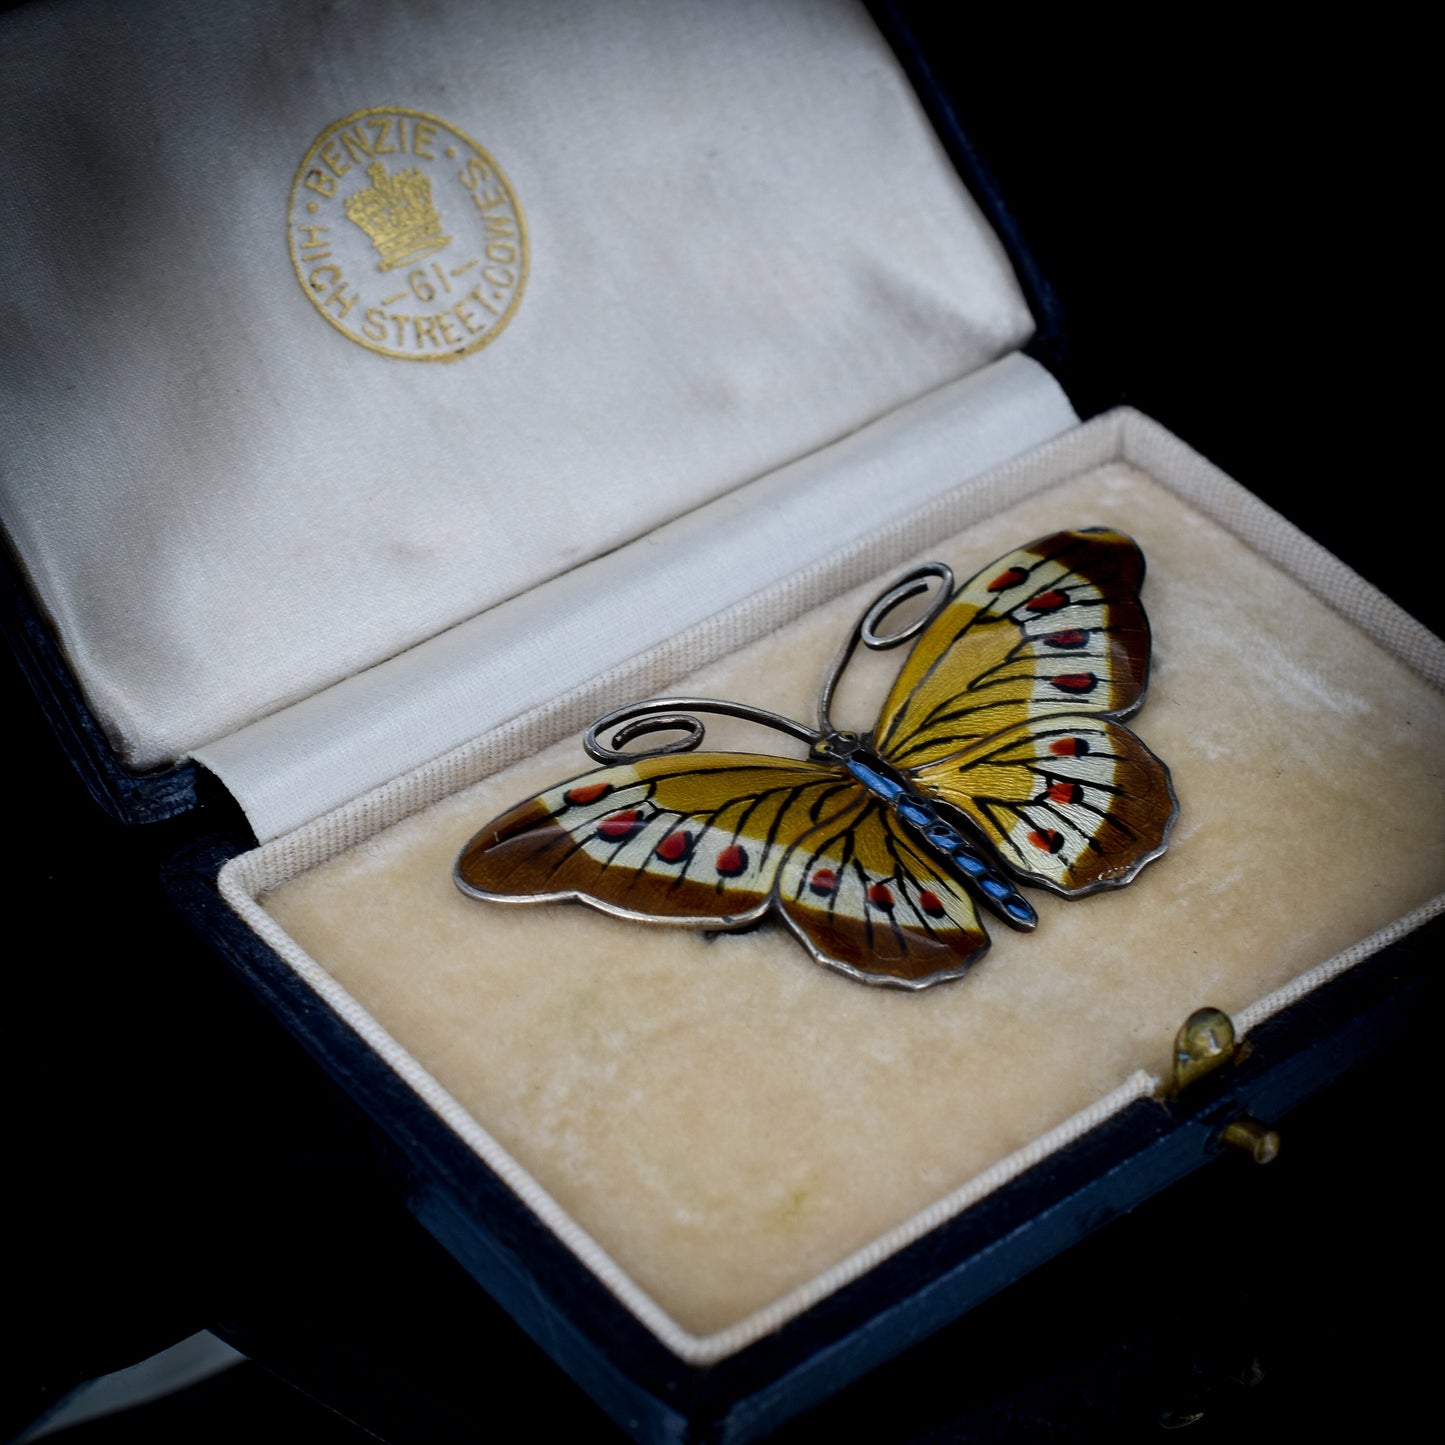 Boxed Vintage Norwegian Enamel Sterling Silver Butterfly Insect Brooch Pin